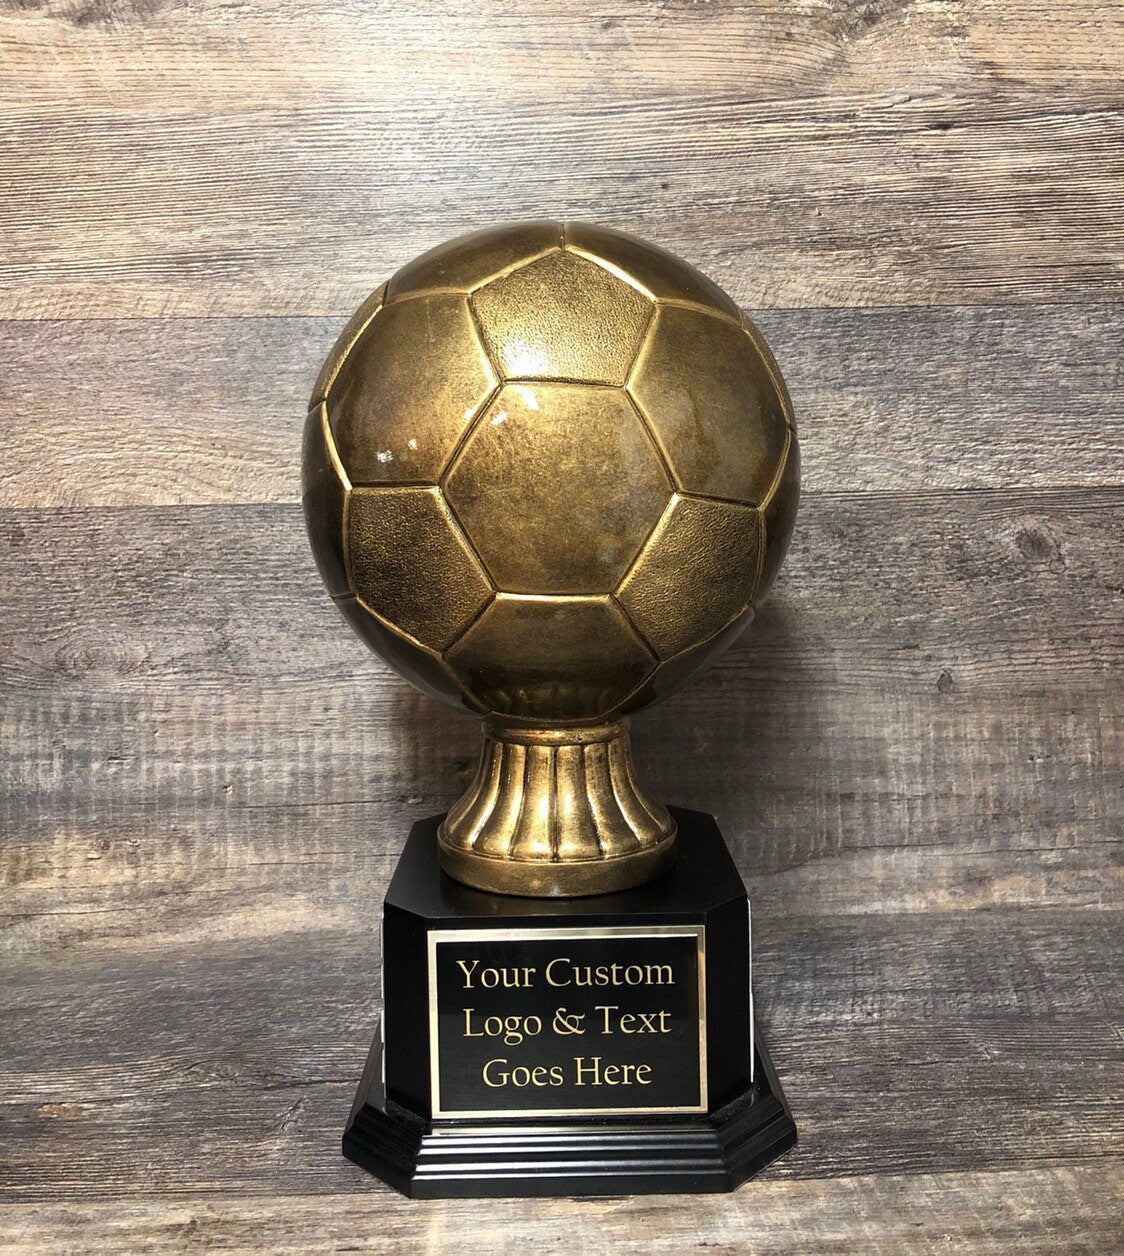 Soccer Trophy Fantasy Soccer Football League Trophy 15" FULL SIZE Antique Gold Soccer Ball 6 or 12 Year Perpetual Championship League Award